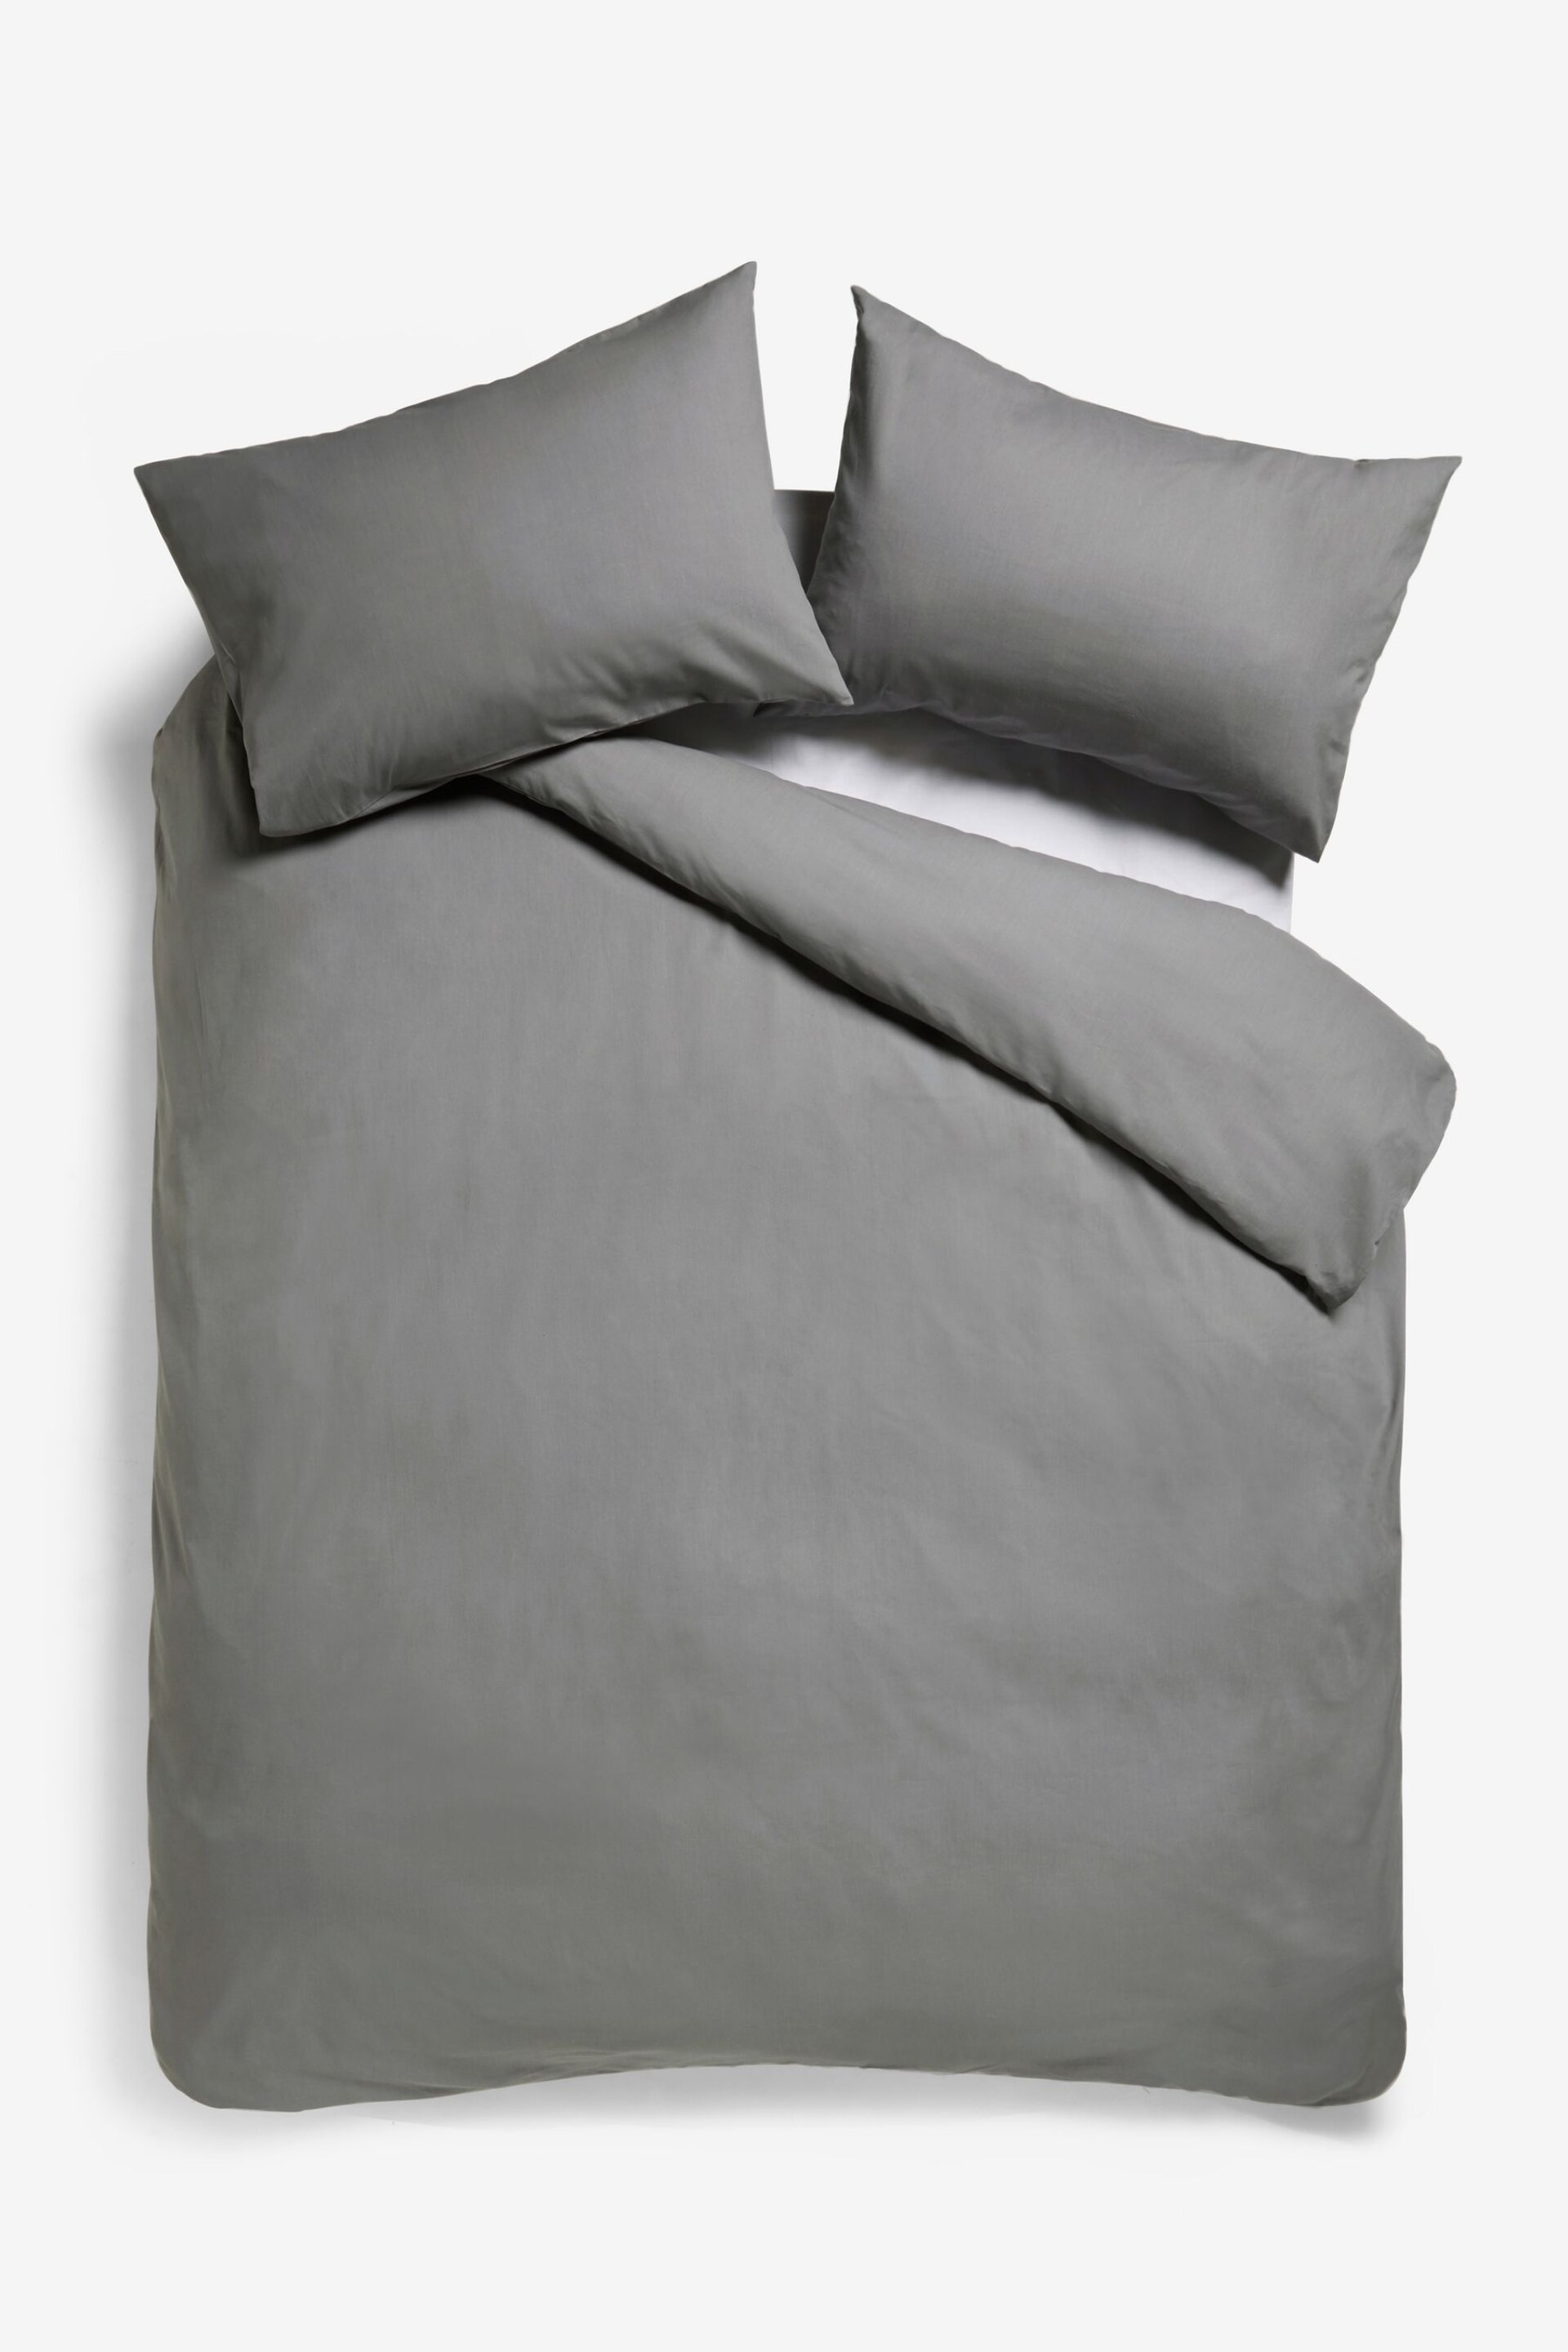 Grey 144 Thread Count 100% Cotton Duvet Cover and Pillowcase Set - Image 2 of 3